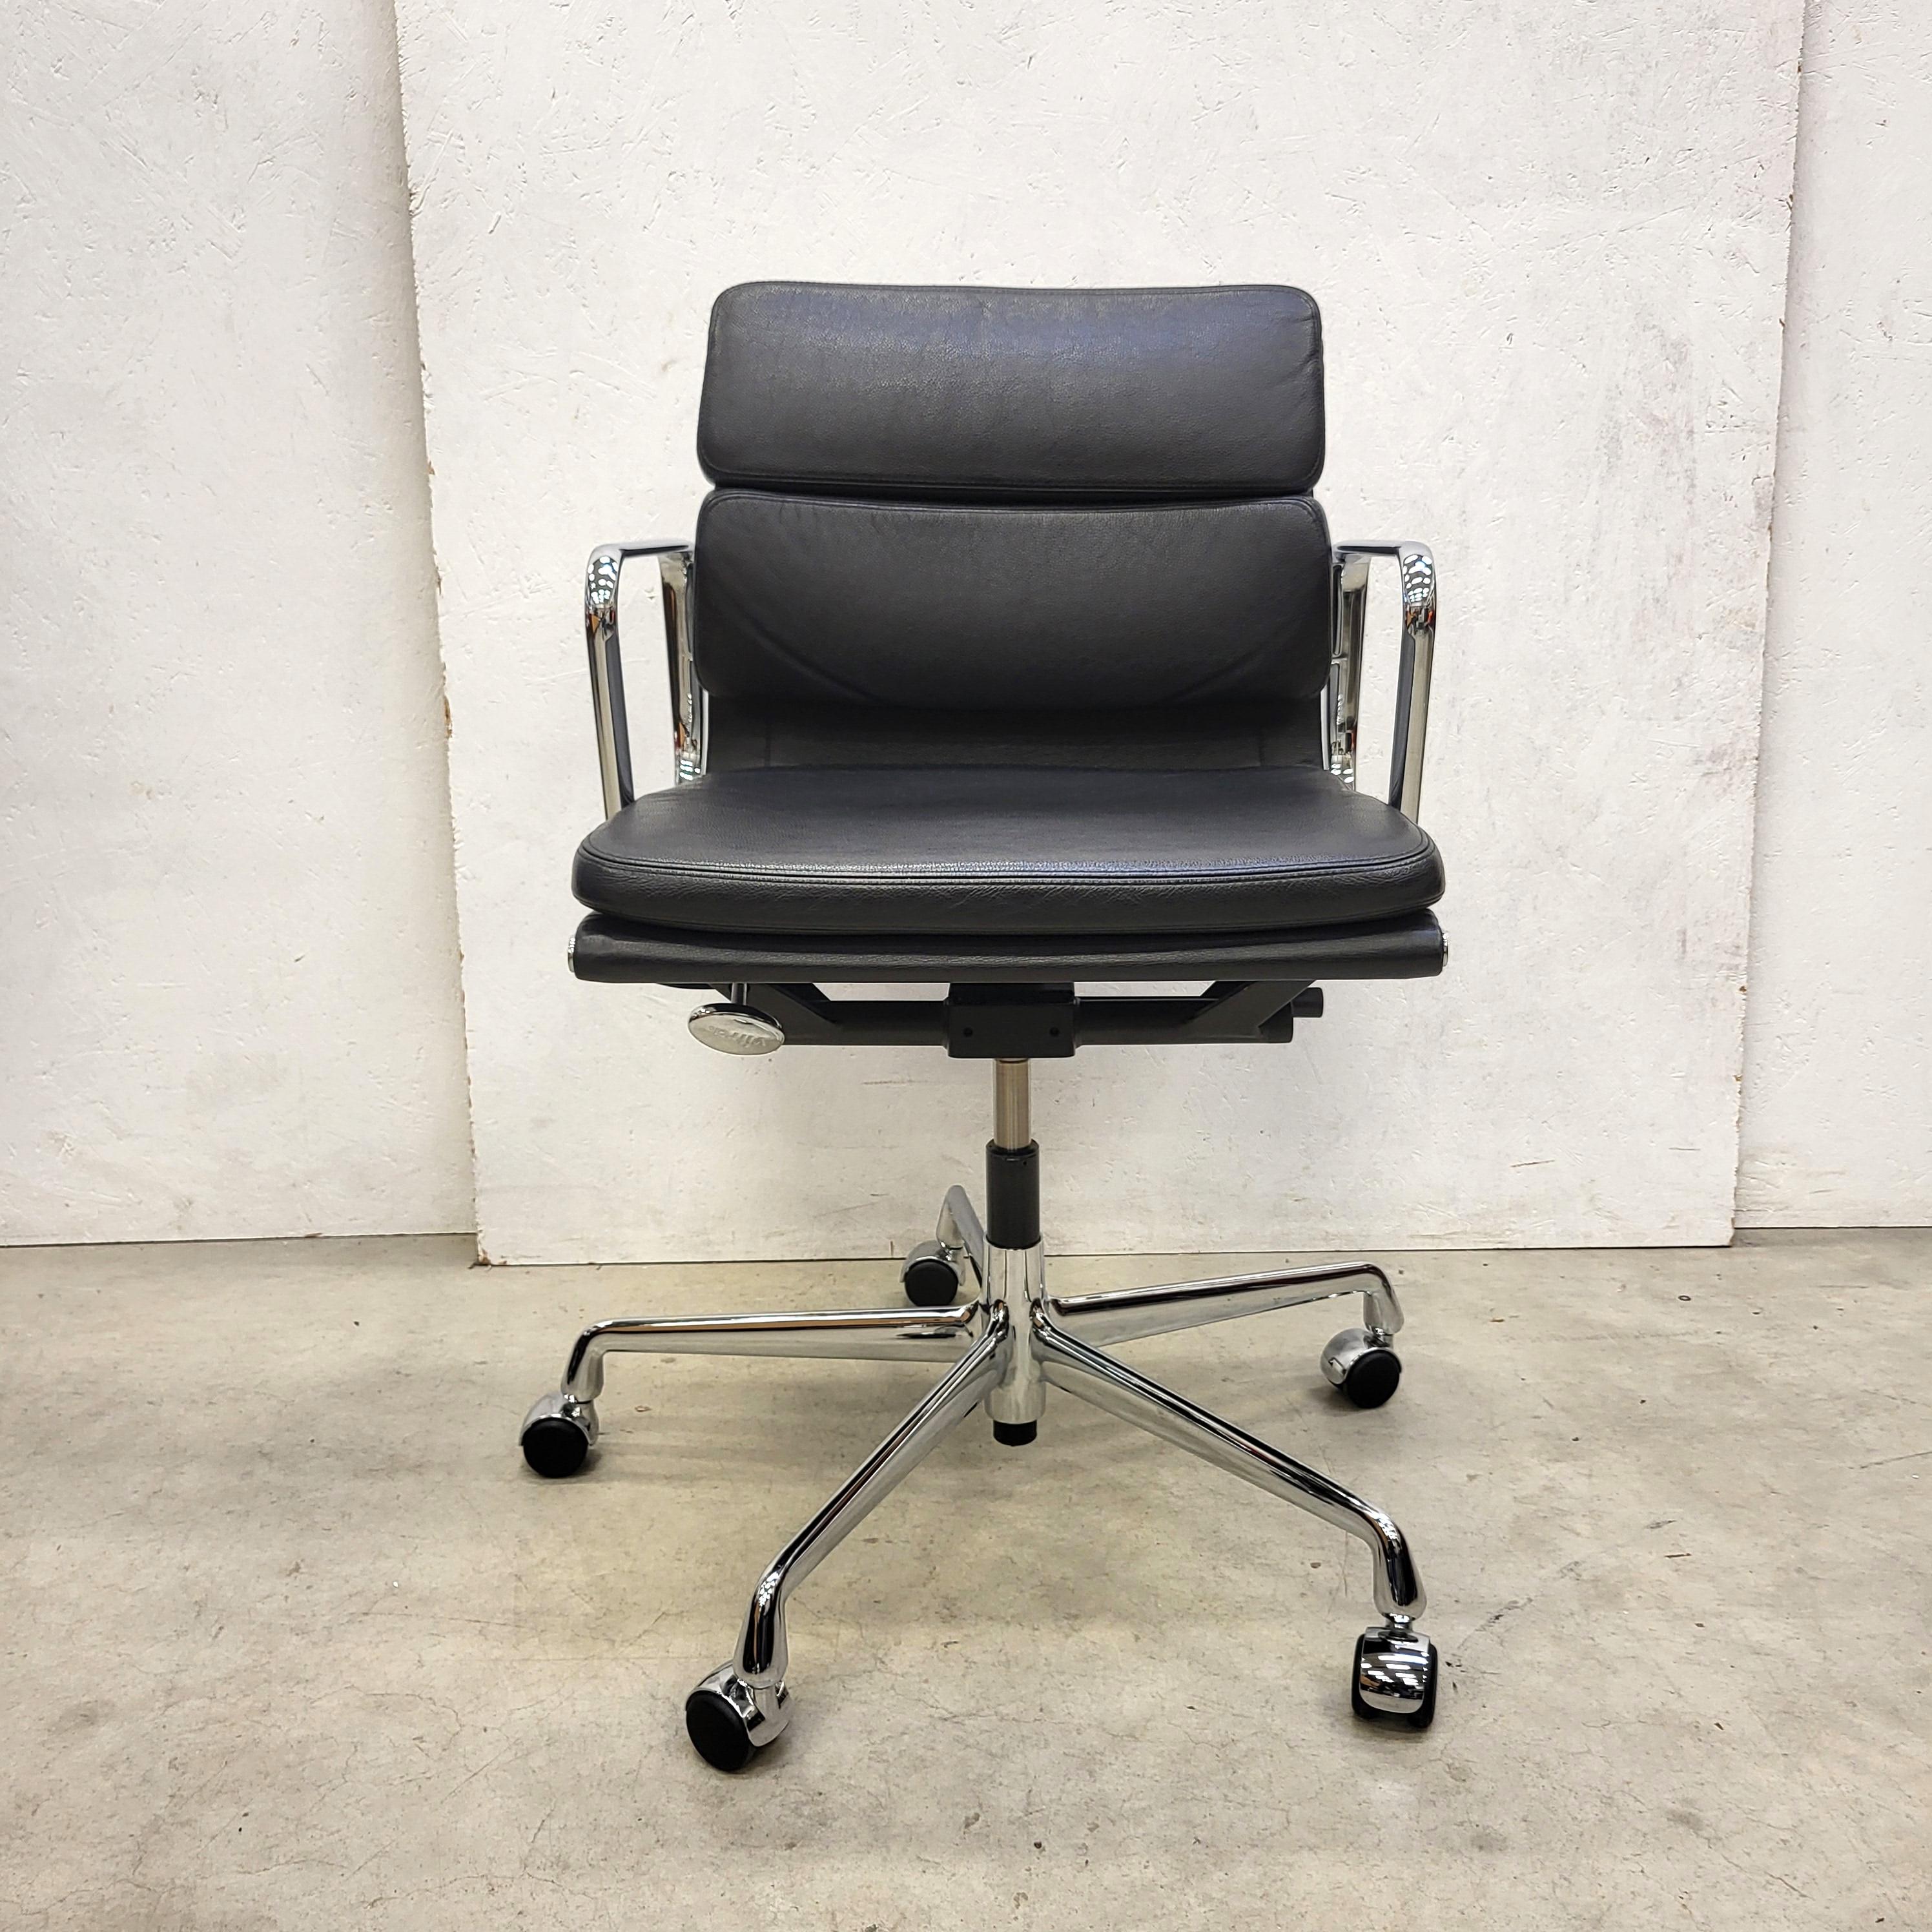 Very nice soft pad office chair model EA217 produced by Vitra. 
The chair features a chromed aluminium frame and was made in 2014.

The chair is height adjustable and has a tilt mechanism.

It has a wonderful black leather upholstery and the back is